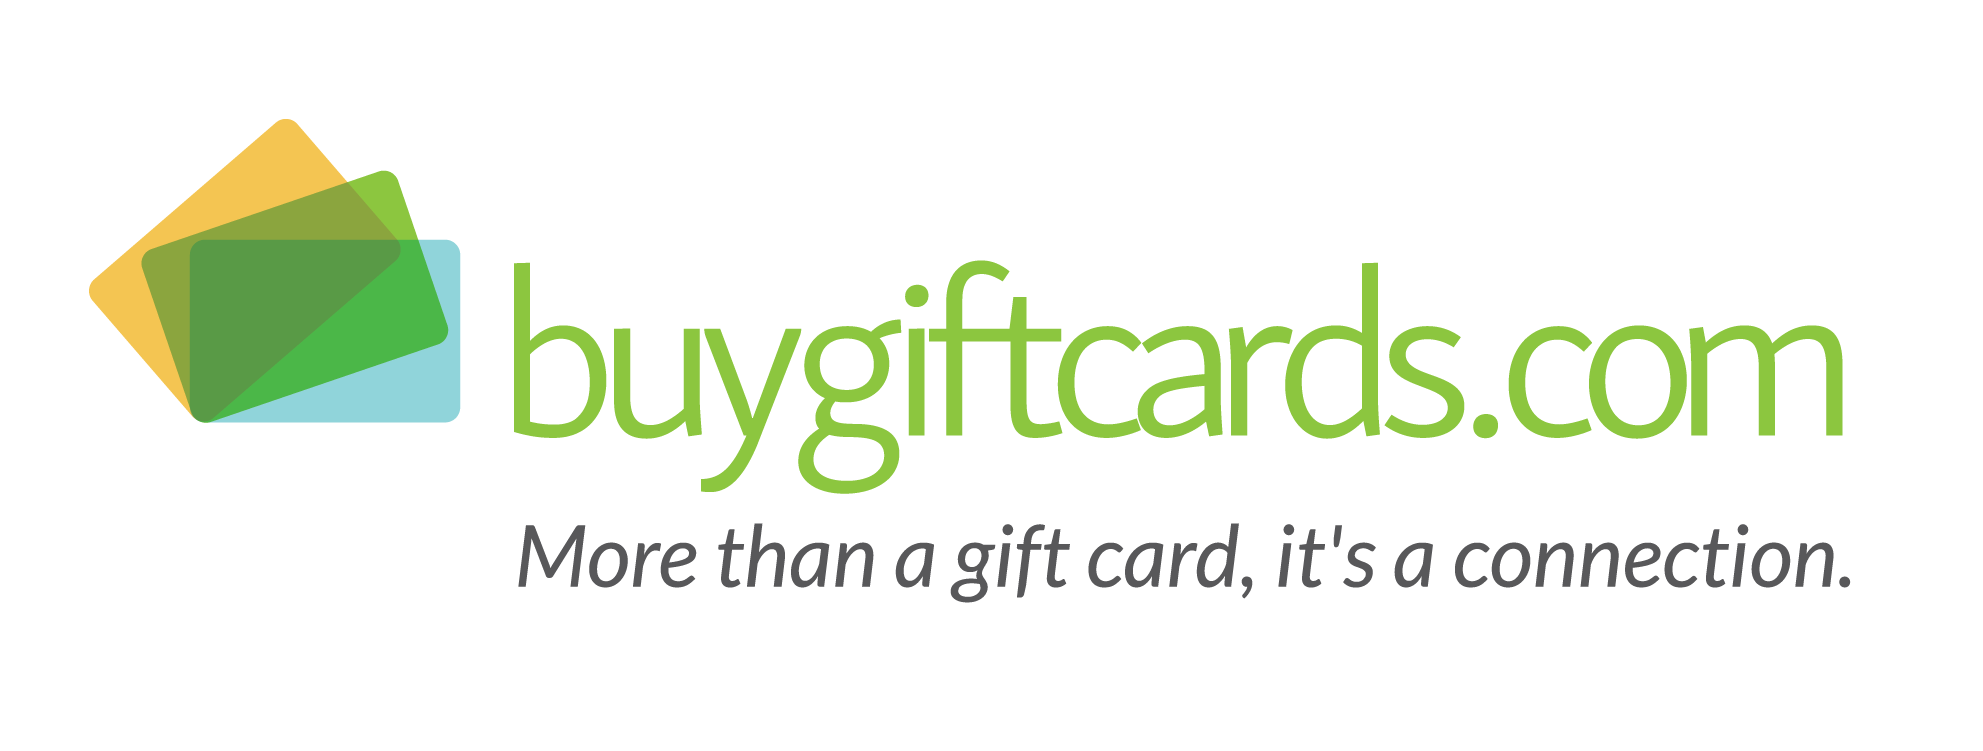 5 Things You Need to Know about eGift Cards | GCG